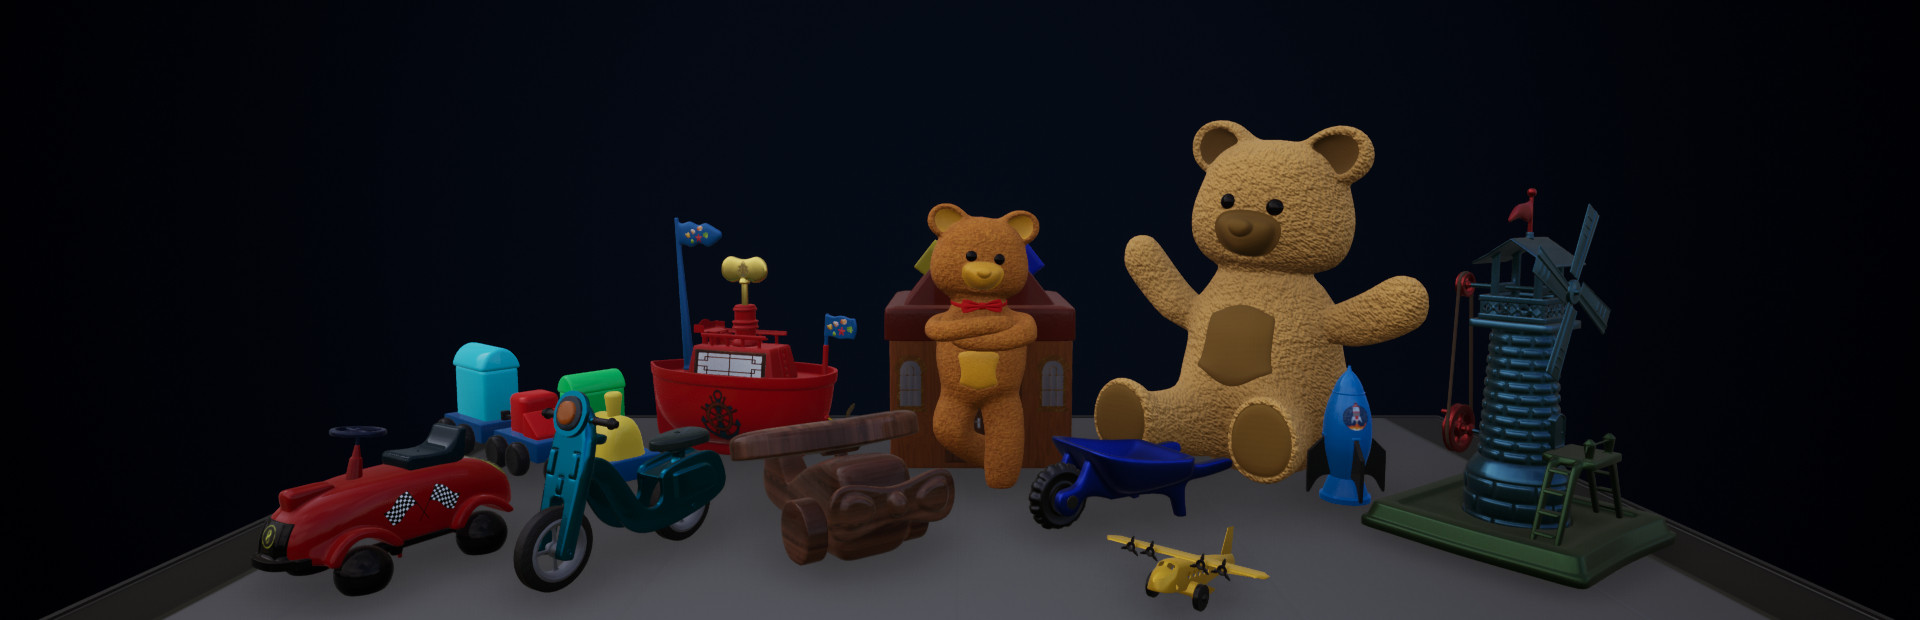 Toy Tinker Simulator cover image